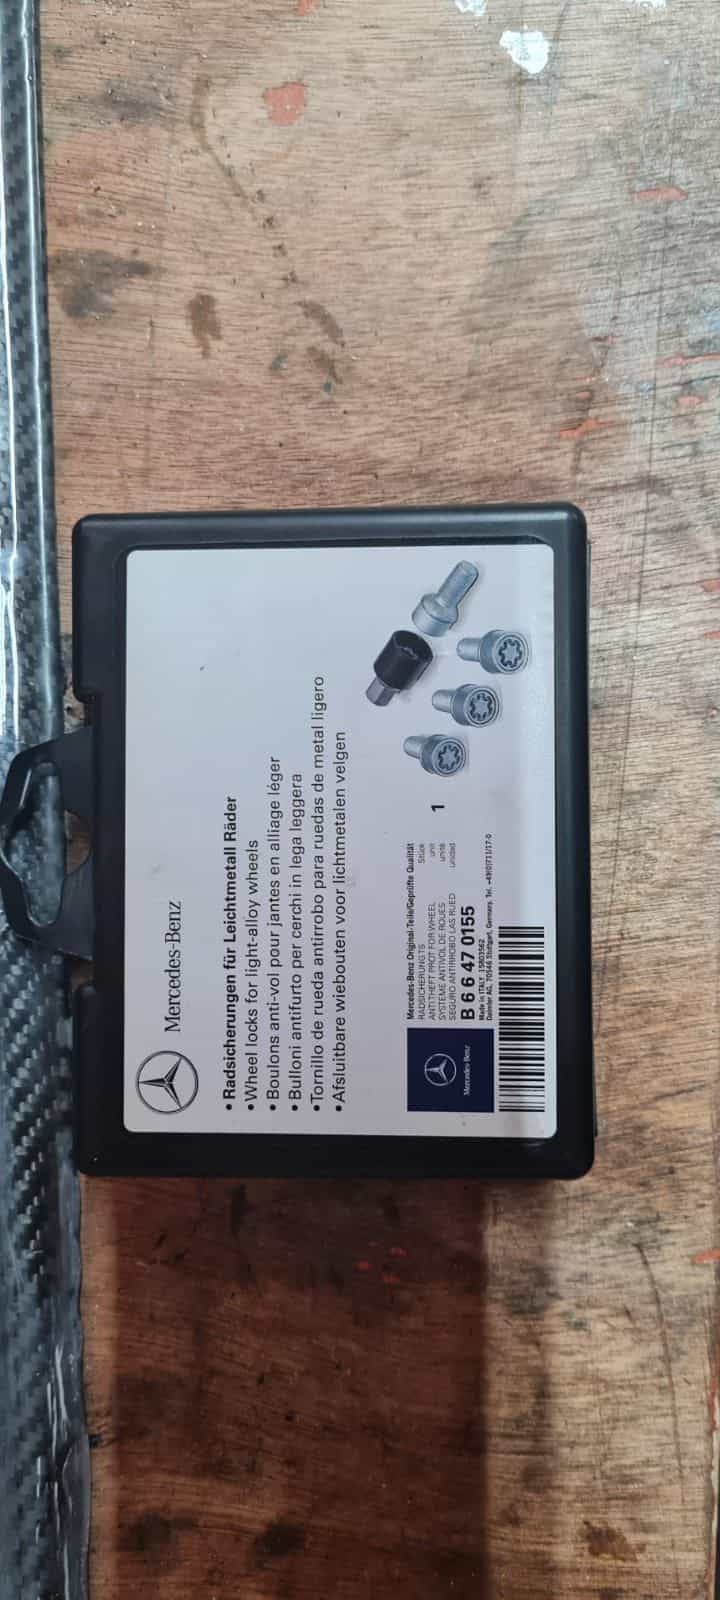 2019 Mercedes-Benz C63 AMG S - Genuine locking wheel nuts - Wheels and Tires/Axles - $30 - Leicestershire LE98GR, United Kingdom